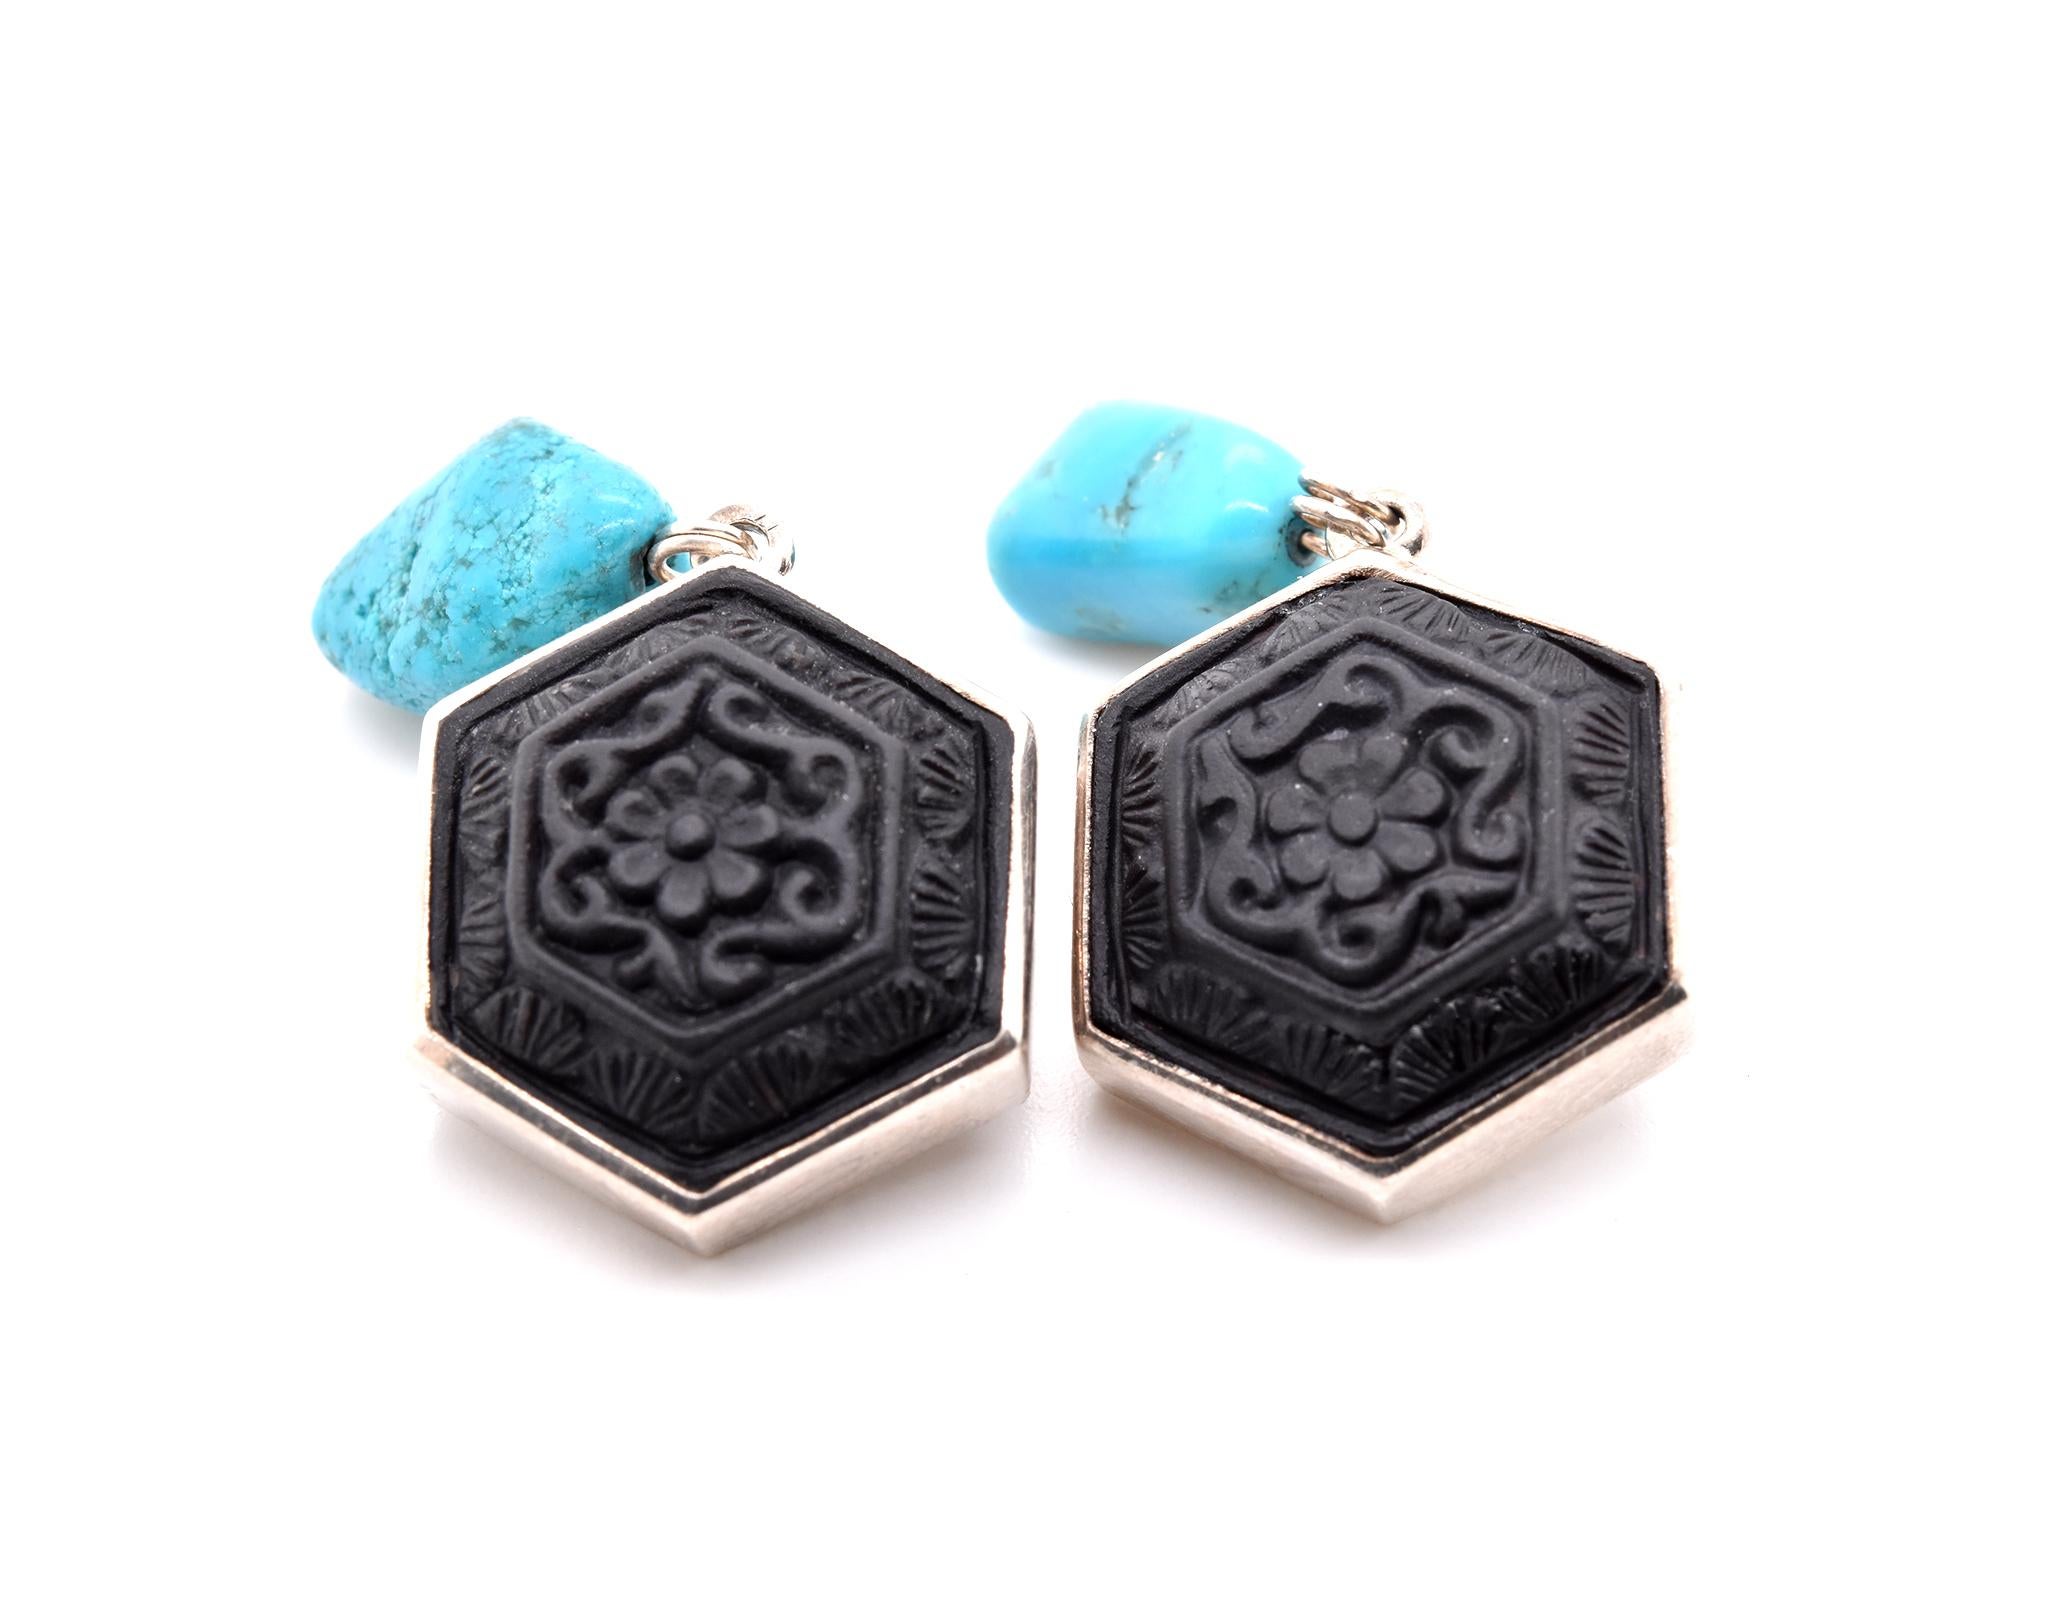 Designer: Stephen Dweck
Material: sterling silver
Gemstone: carved onyx and turquoise nuggets
Dimensions: earrings measure 17.90mm x 36.43mm
Weight: 17.7 grams
